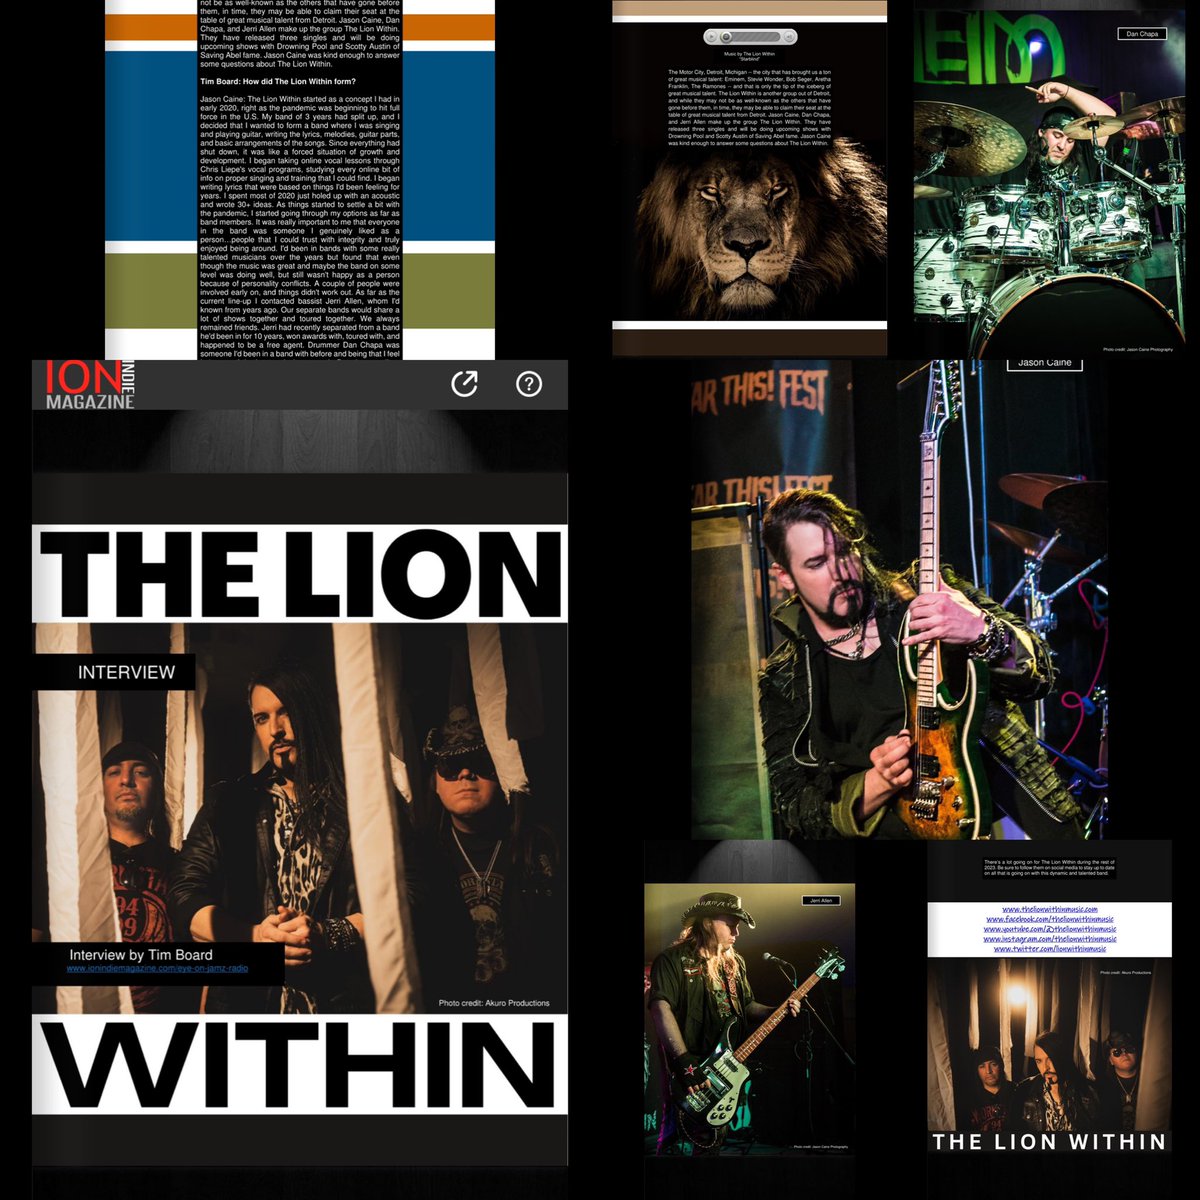 Throwback Thursday - July 2023 - The Lion Within ION Indie Magazine feature interview. Read the full interview online here! ⬇️ online.flipbuilder.com/dxlv/jbiv/#p=88 #thelionwithin #ionindiemagazine #throwback #throwbackthursday #tbt #band #rockband #bandinterview #magazine #musicmagazine